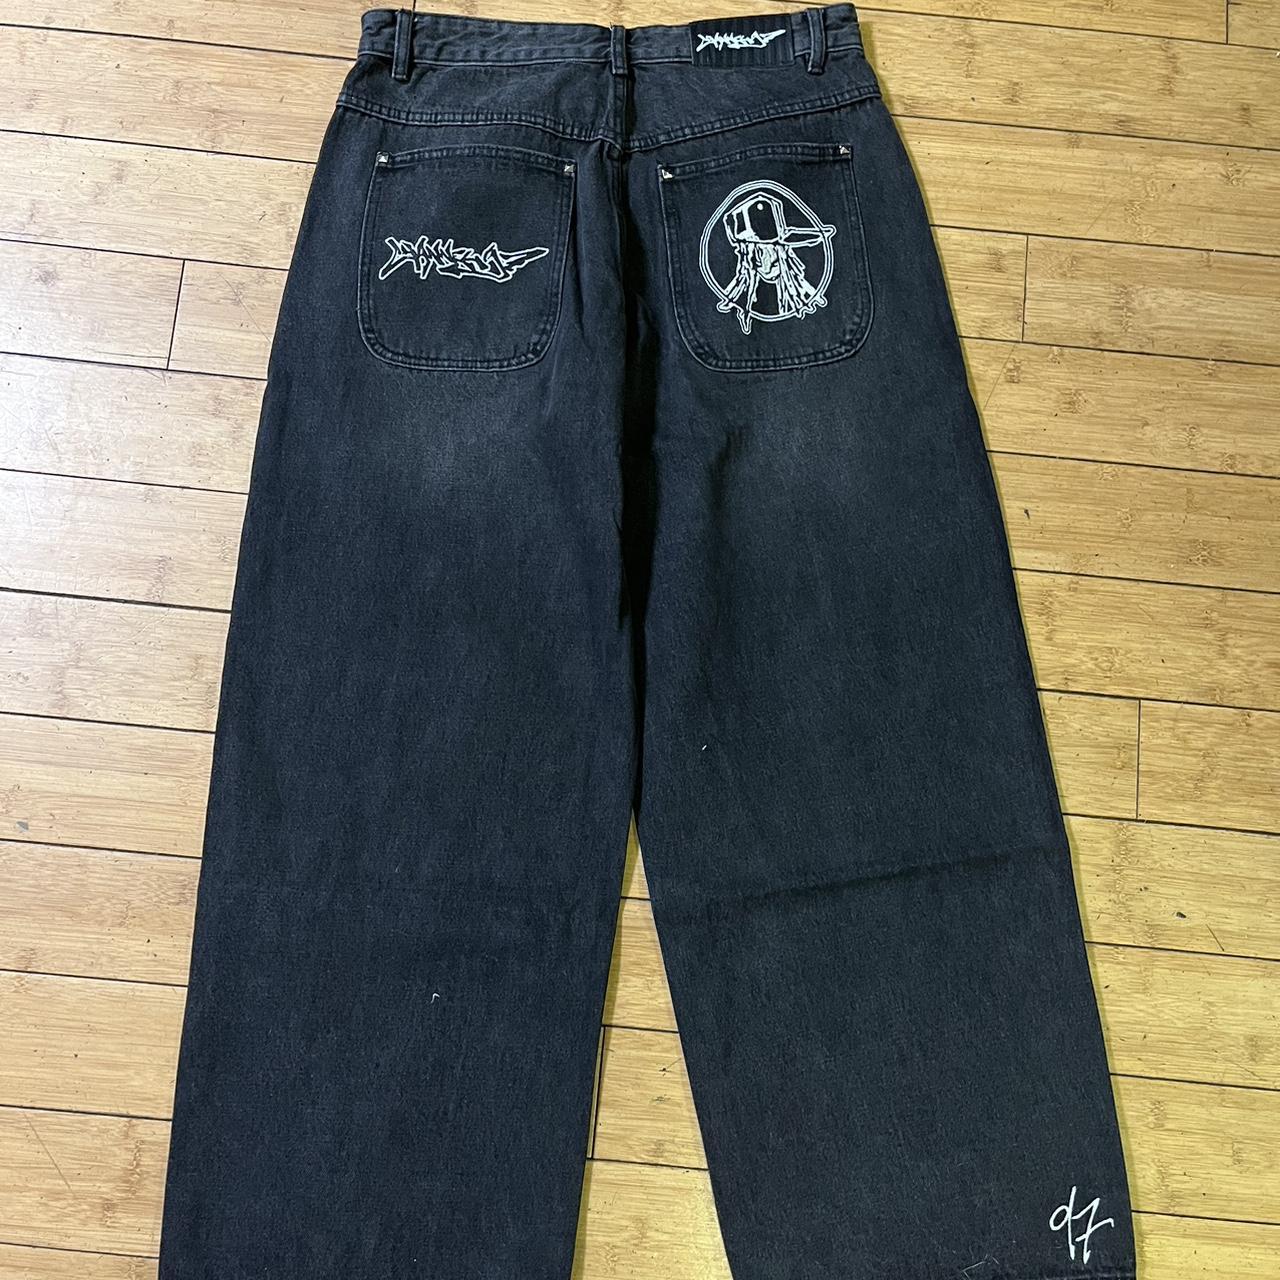 Baggy jeans size large hmu for any questions - Depop